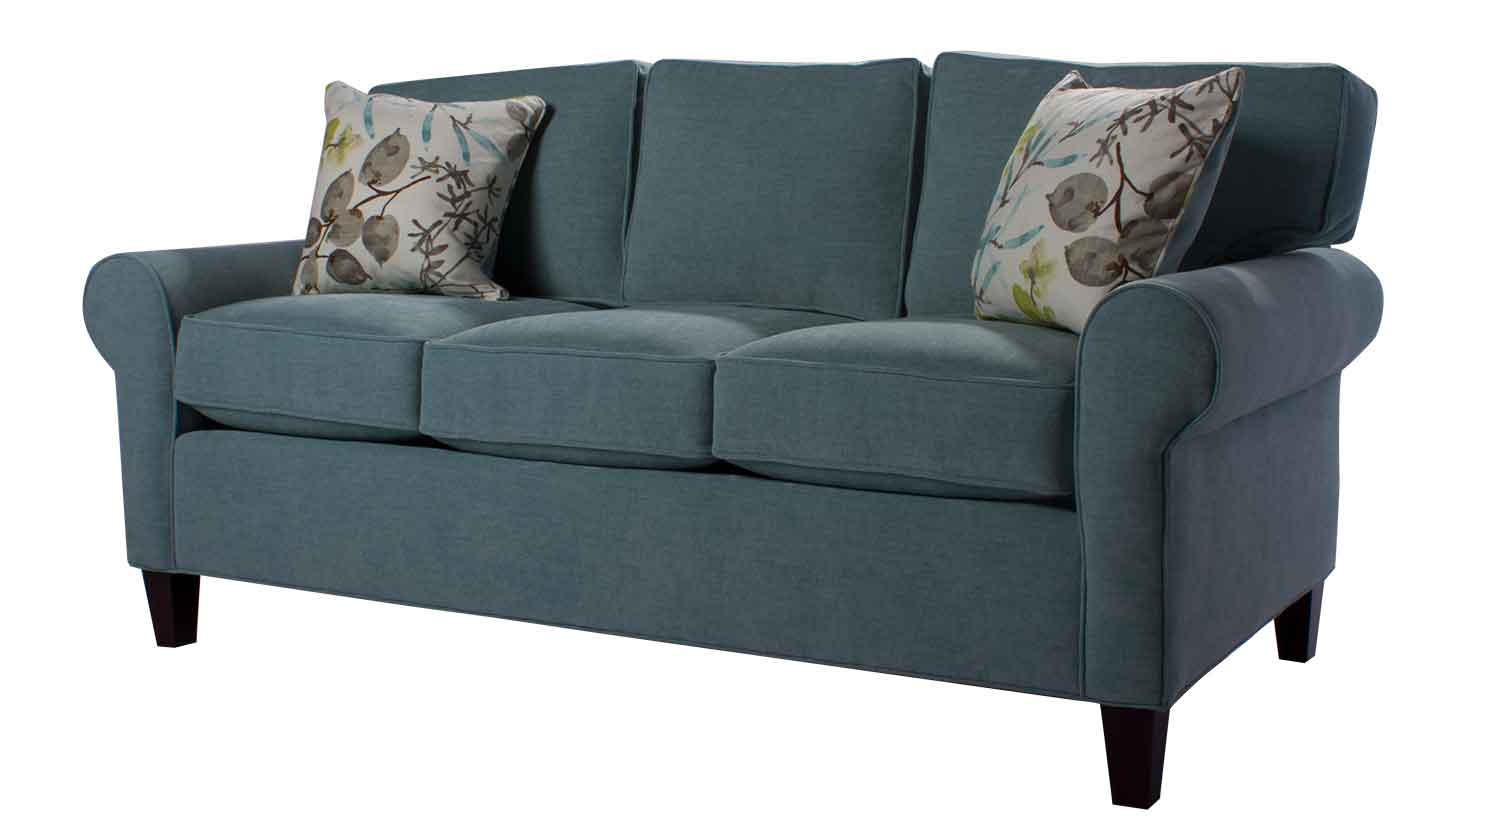 https://www.circlefurniture.com/userfiles/images/blog/2019/10/upholstery/Copley.jpg